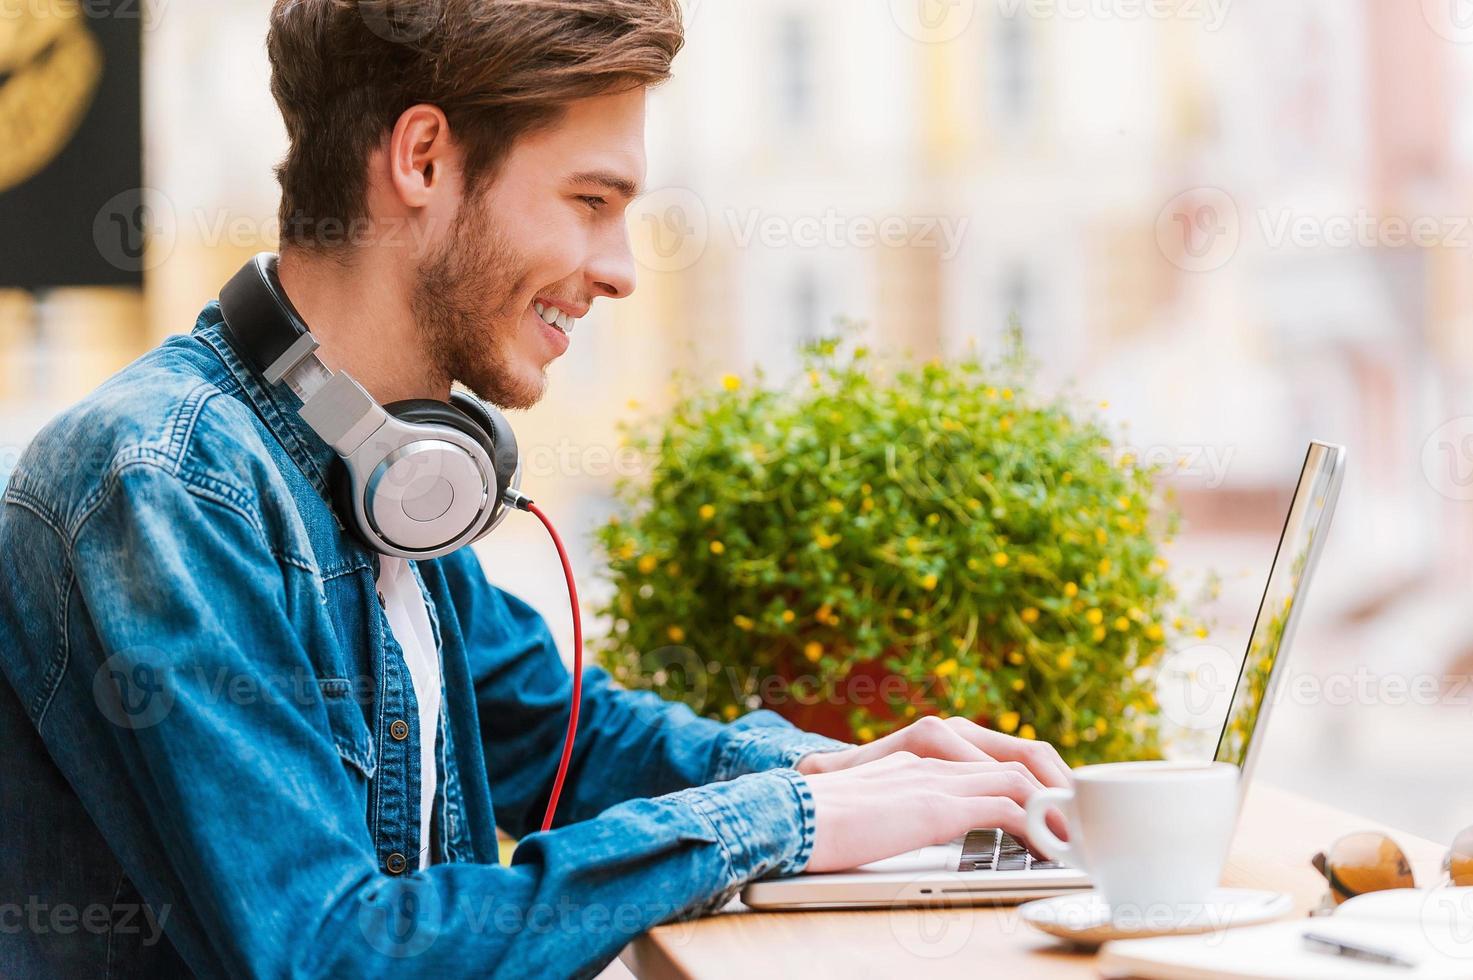 Working with pleasure. Side view of smiling young man working on laptop while sitting at sidewalk cafe photo